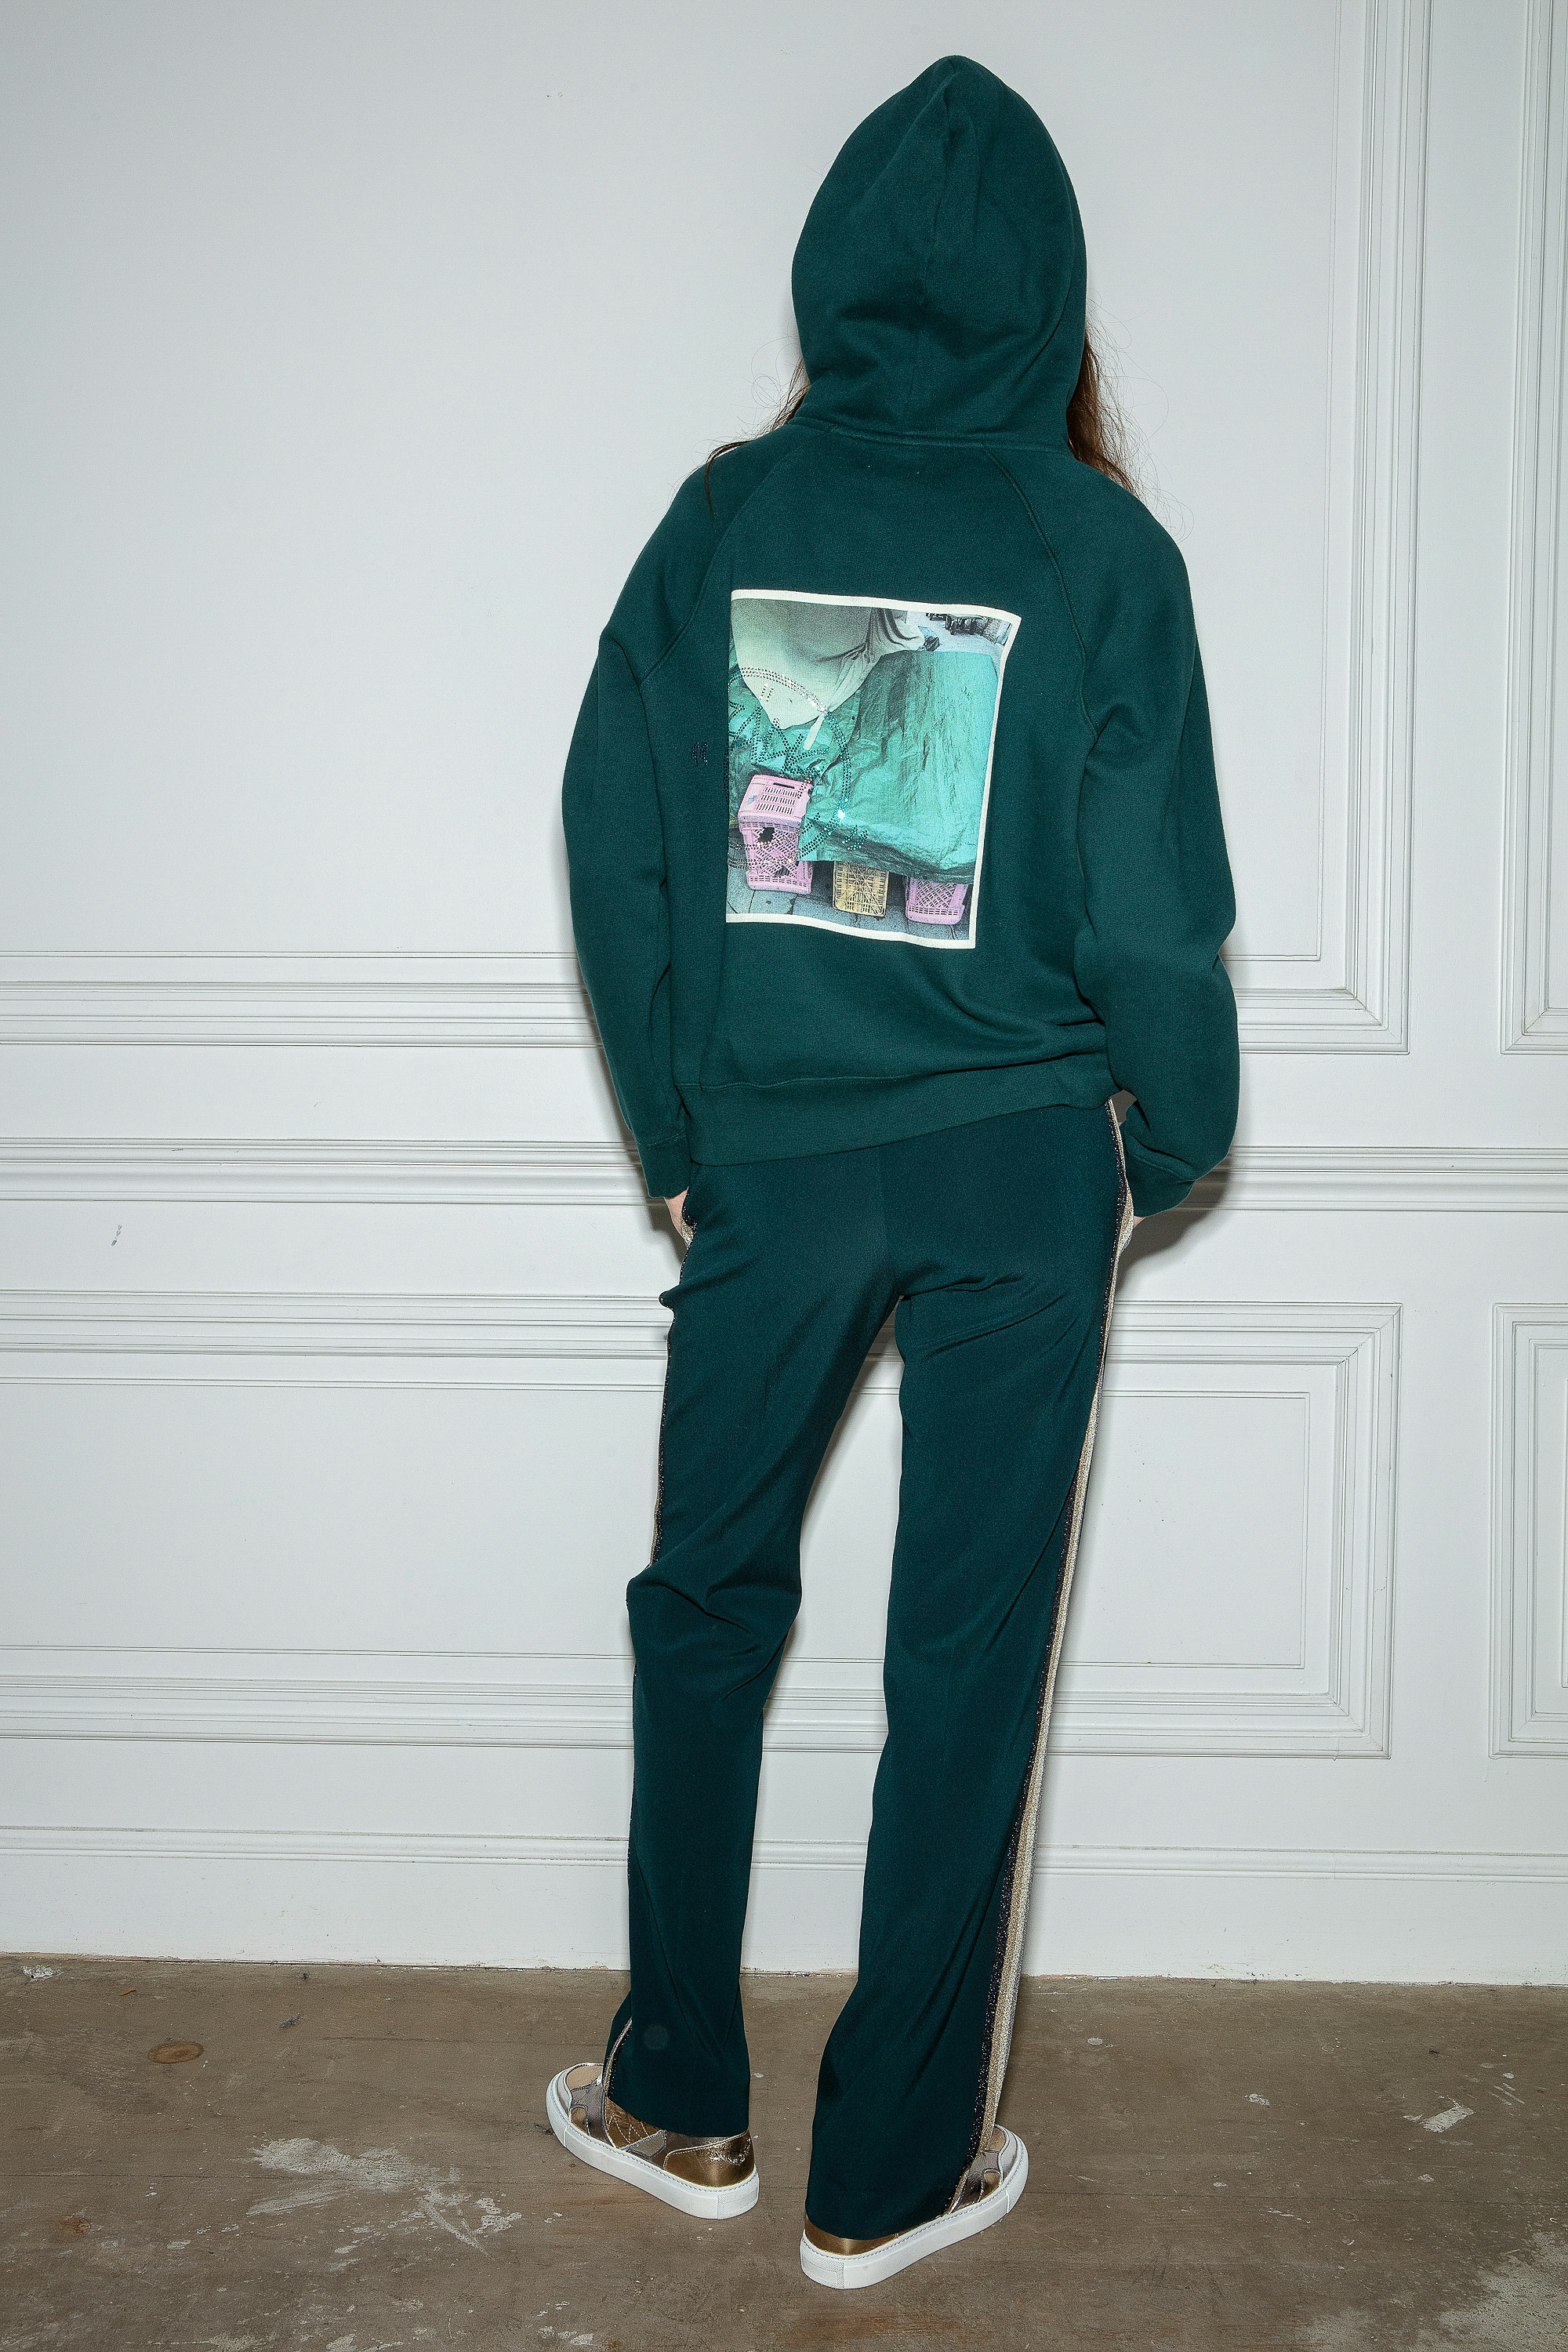 Georgy Photoprint Color Box スウェット Women’s green cotton sweatshirt with photoprint and diamanté on the back